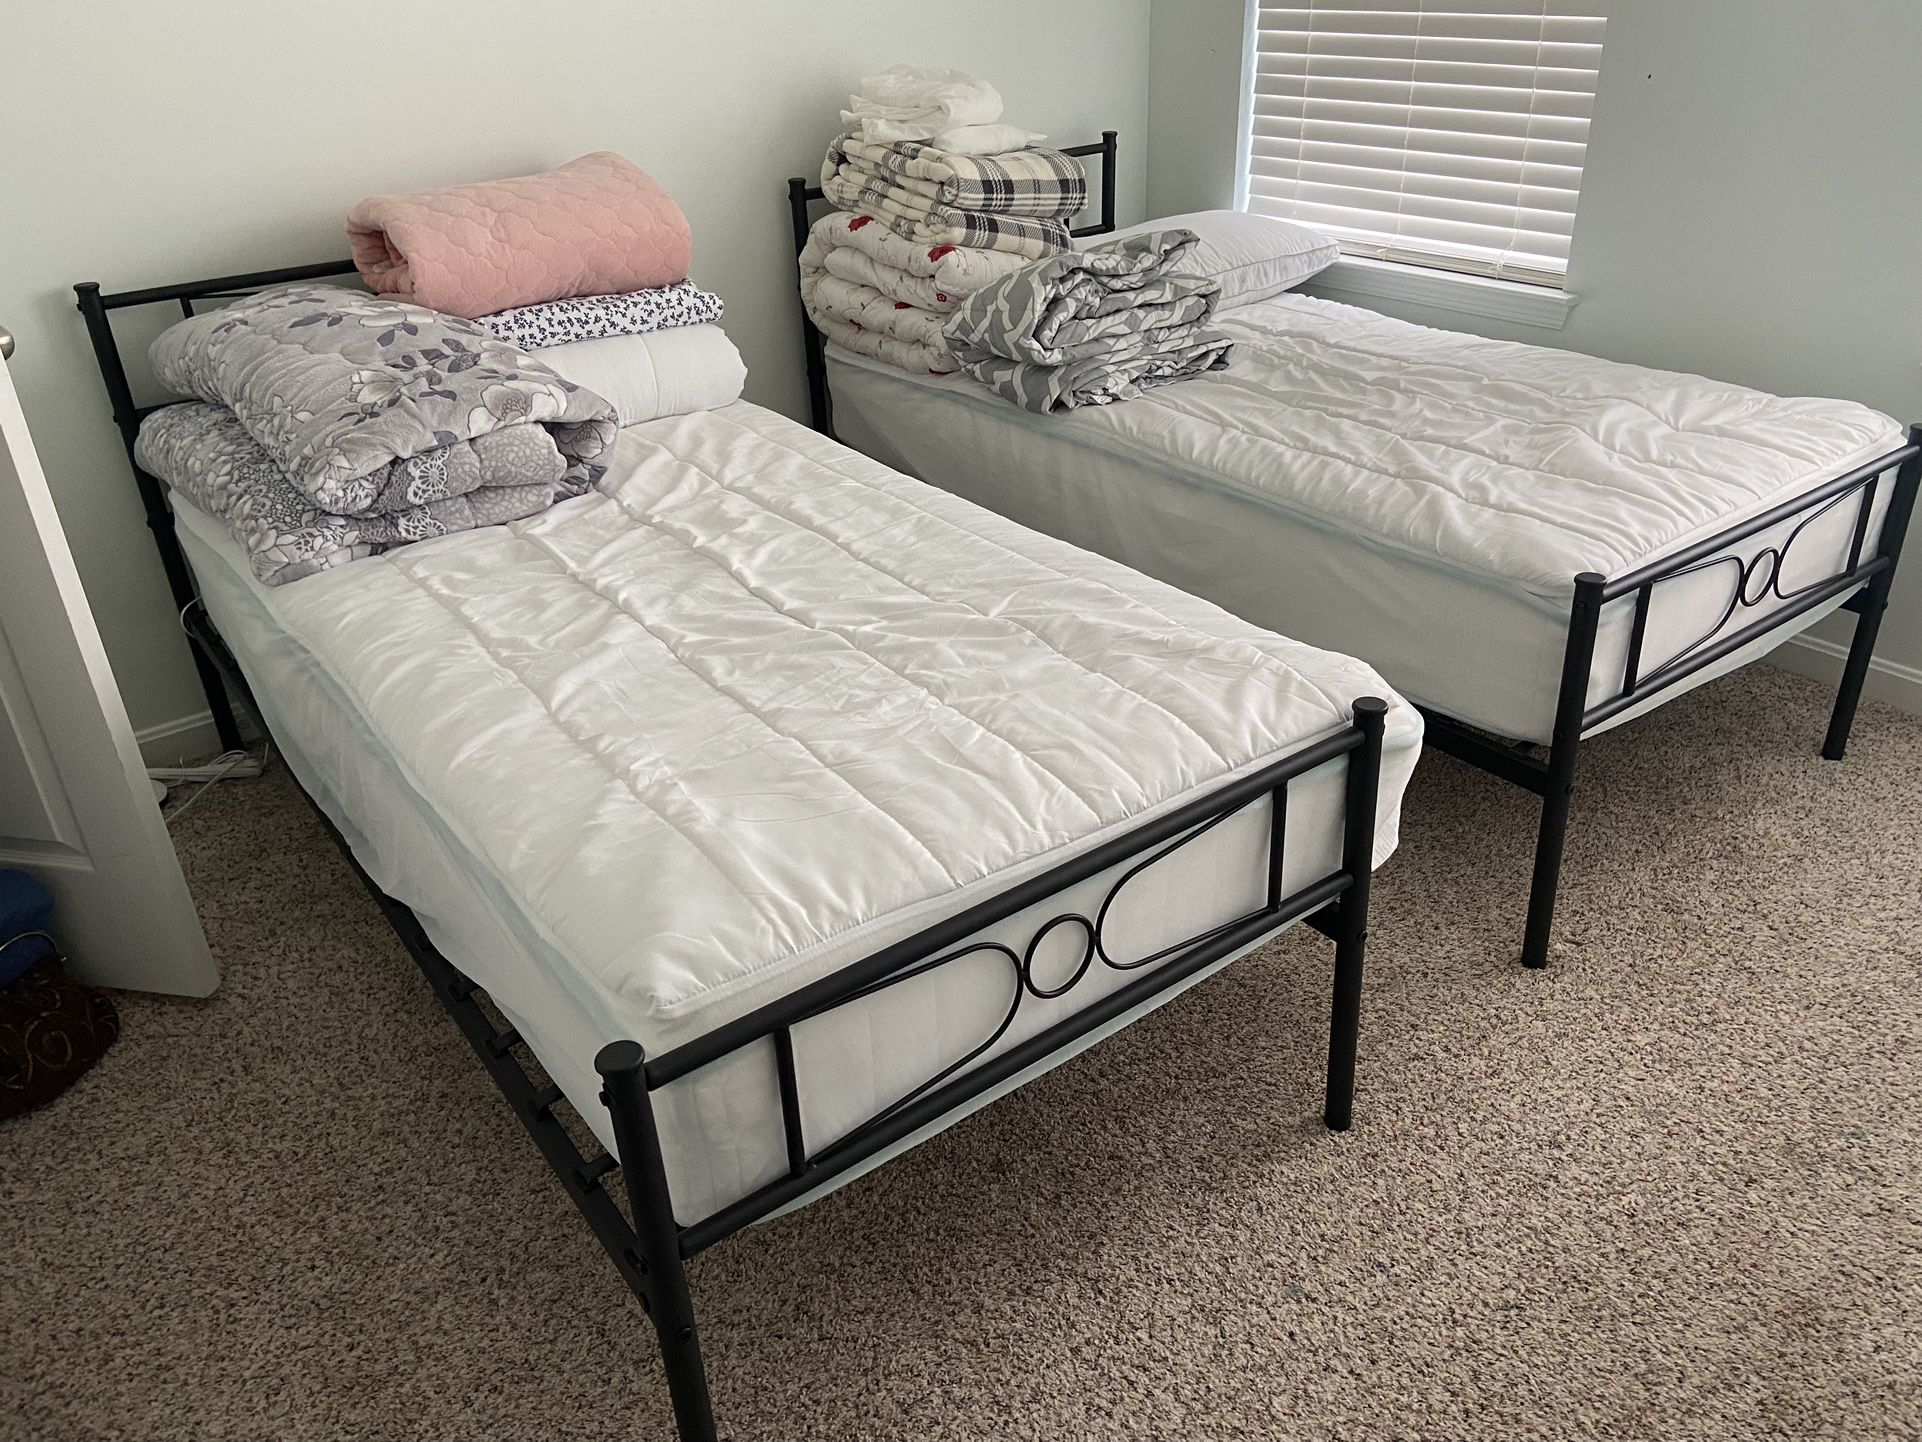 Twin Mattresses And Frames Like New 